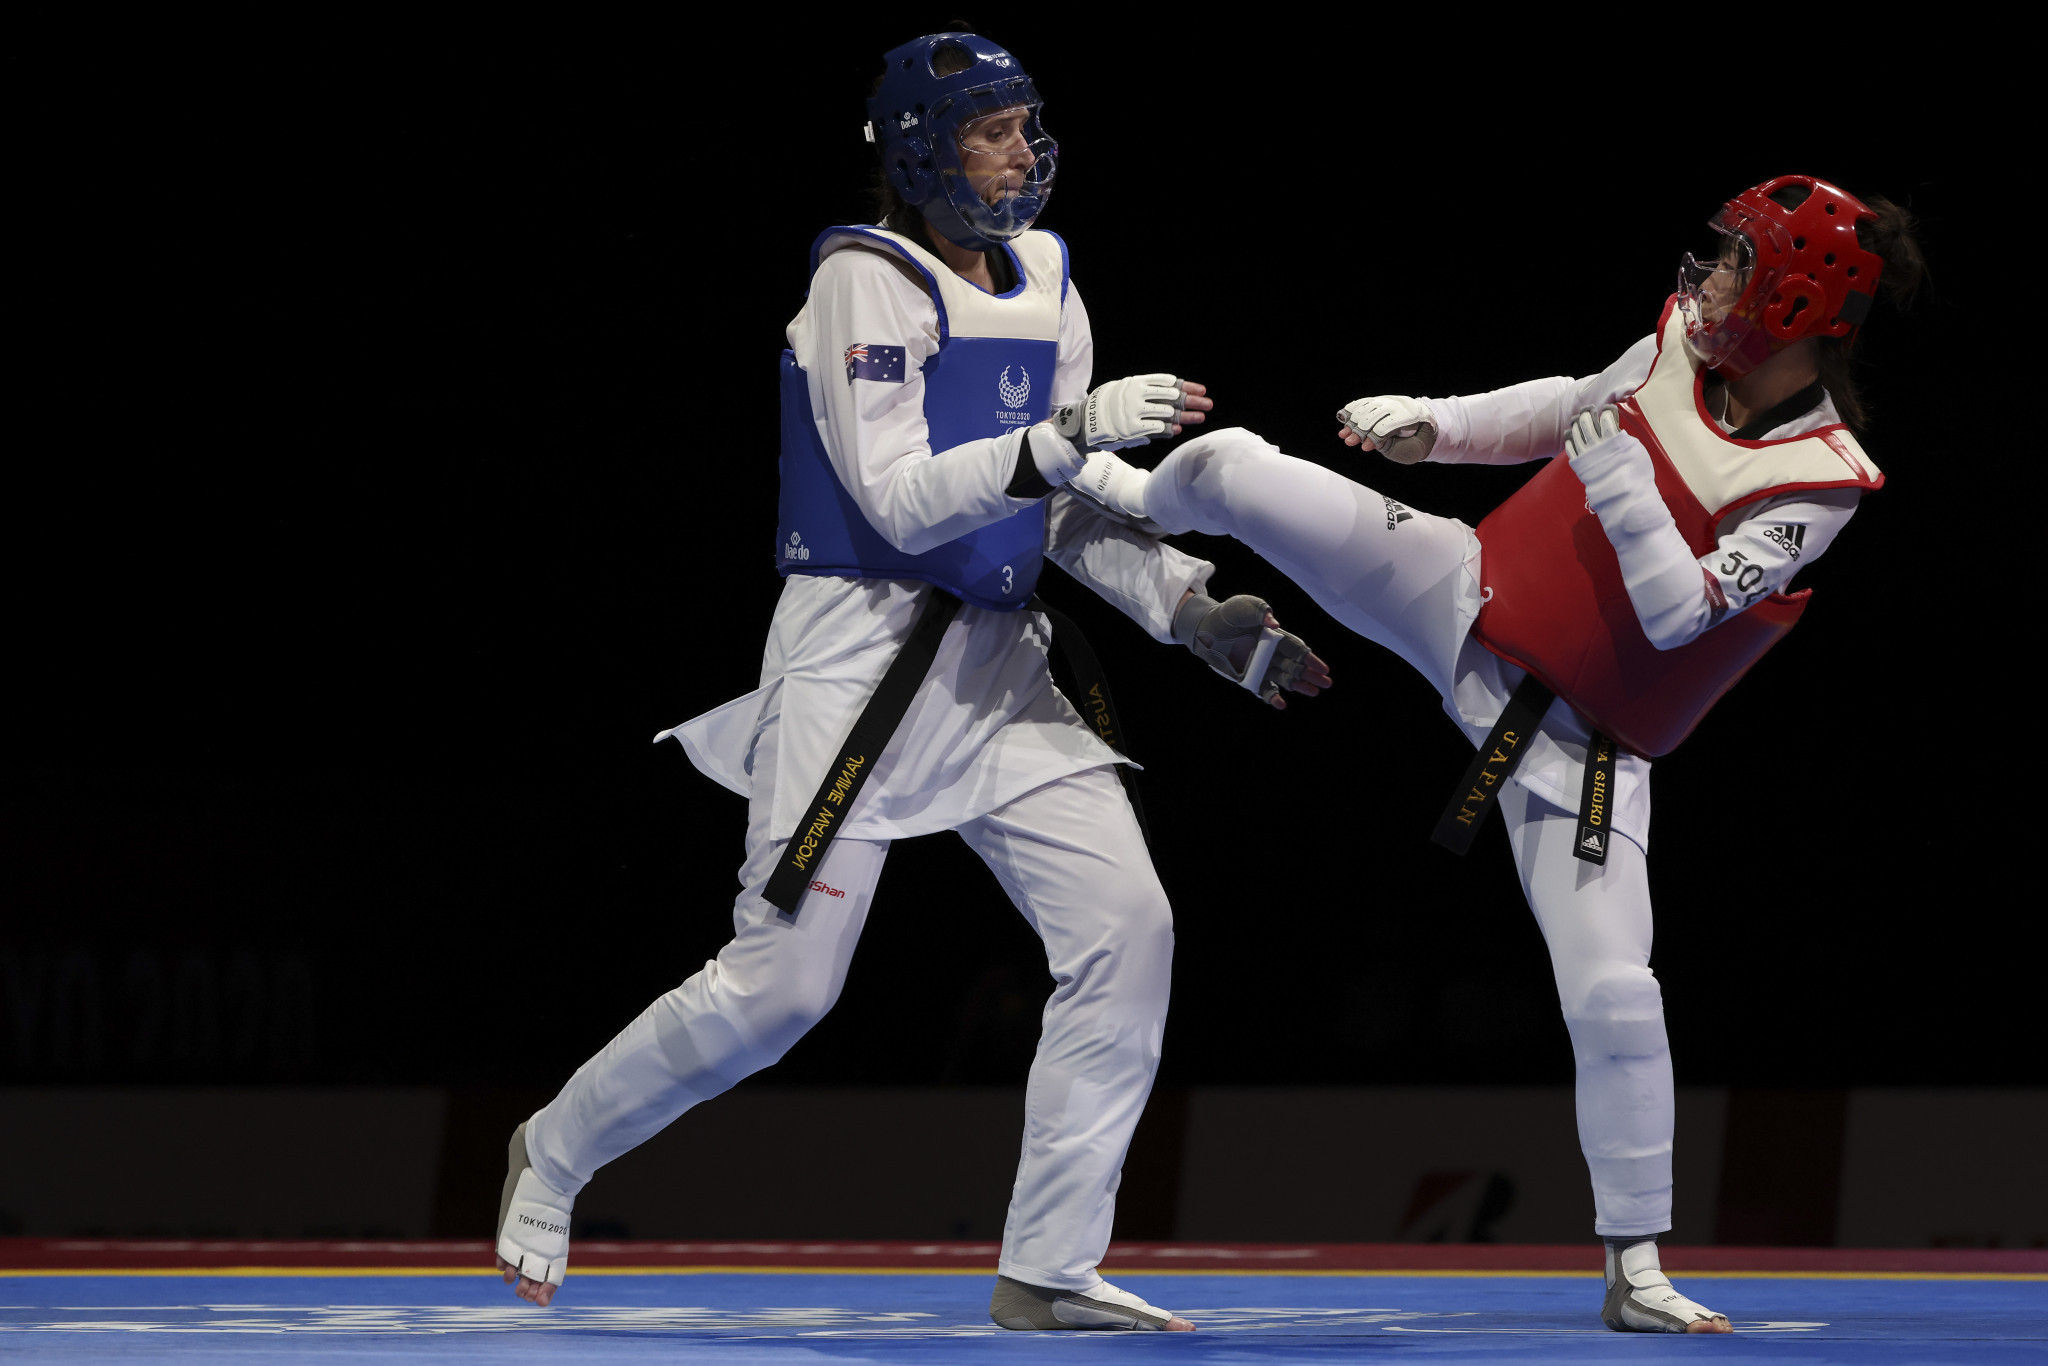 The number of Para taekwondo events has been upgraded from six to 10 for the Paris 2024 Olympics ©Getty Images